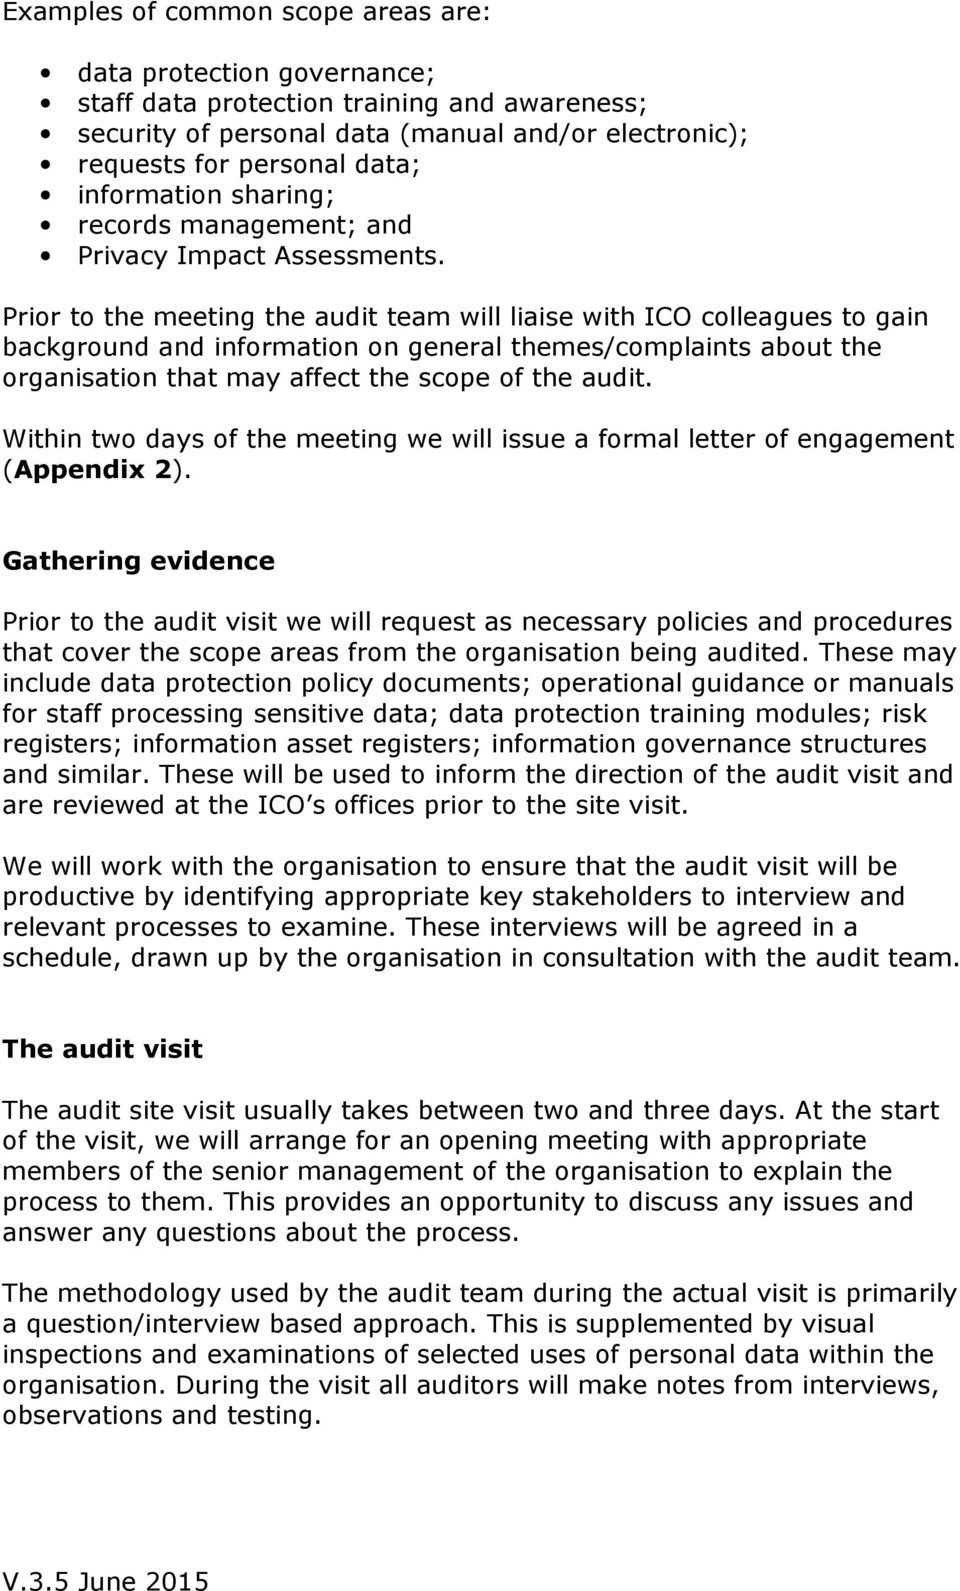 Prior to the meeting the audit team will liaise with ICO colleagues to gain background and information on general themes/complaints about the organisation that may affect the scope of the audit.